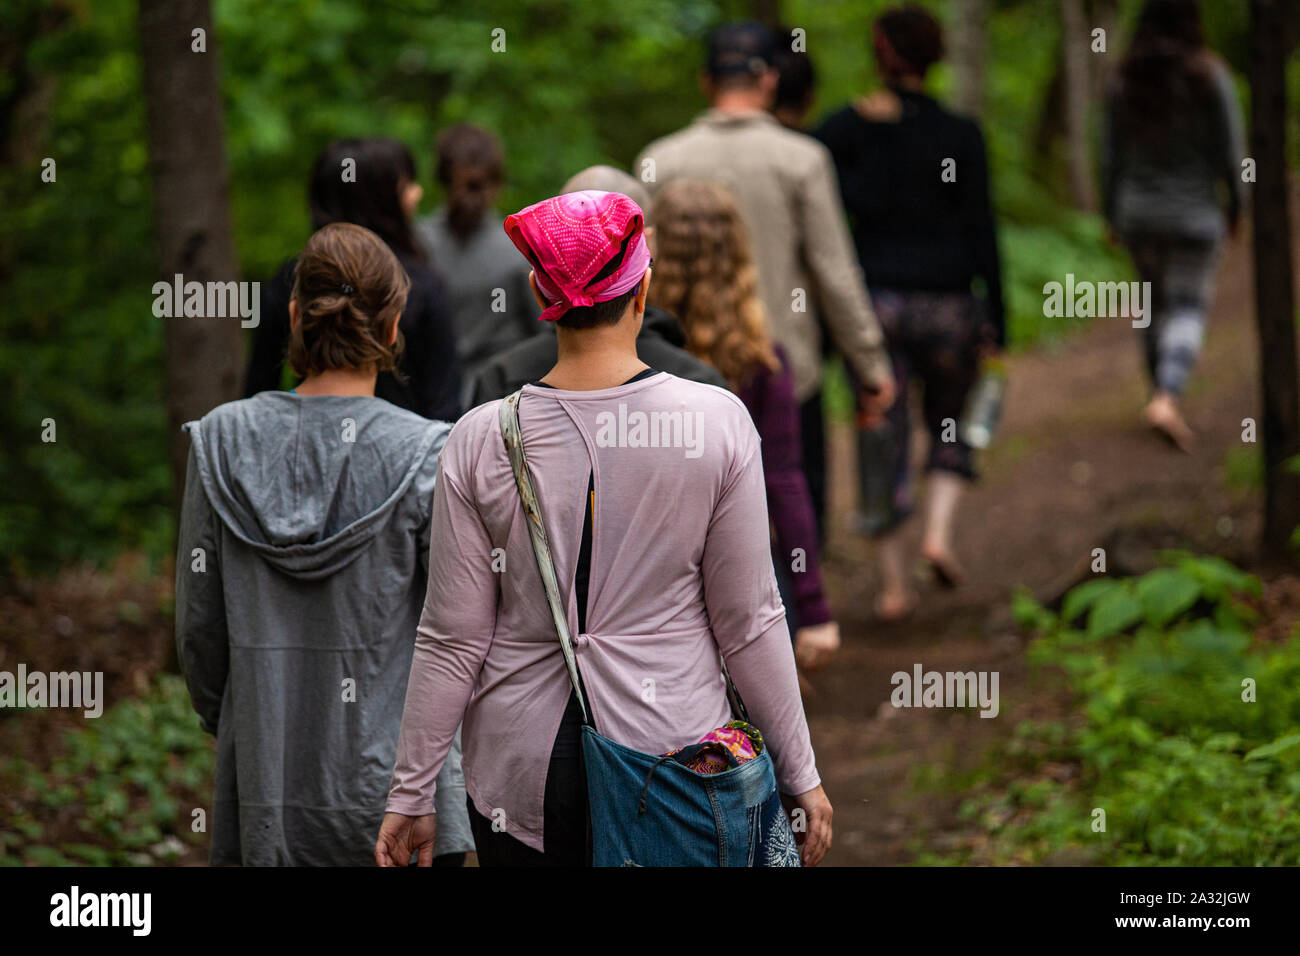 An eclectic mix of people are seen walking barefooted through a sacred woodland trail during a weekend experiencing multicultural activities, with copy space. Stock Photo